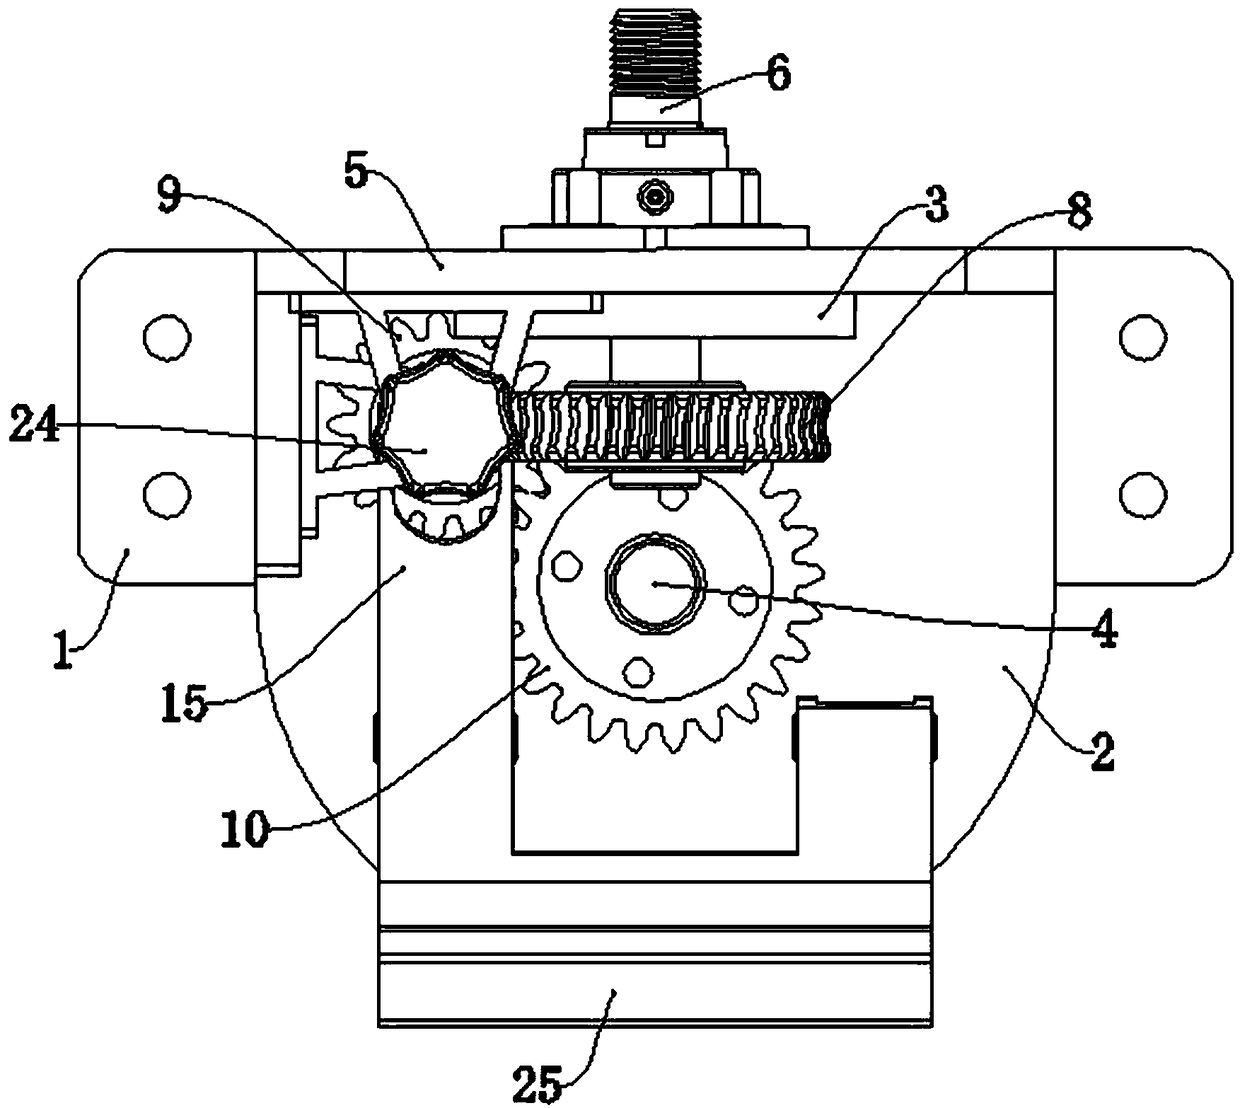 Fixture for machining bolt ball on common lathe